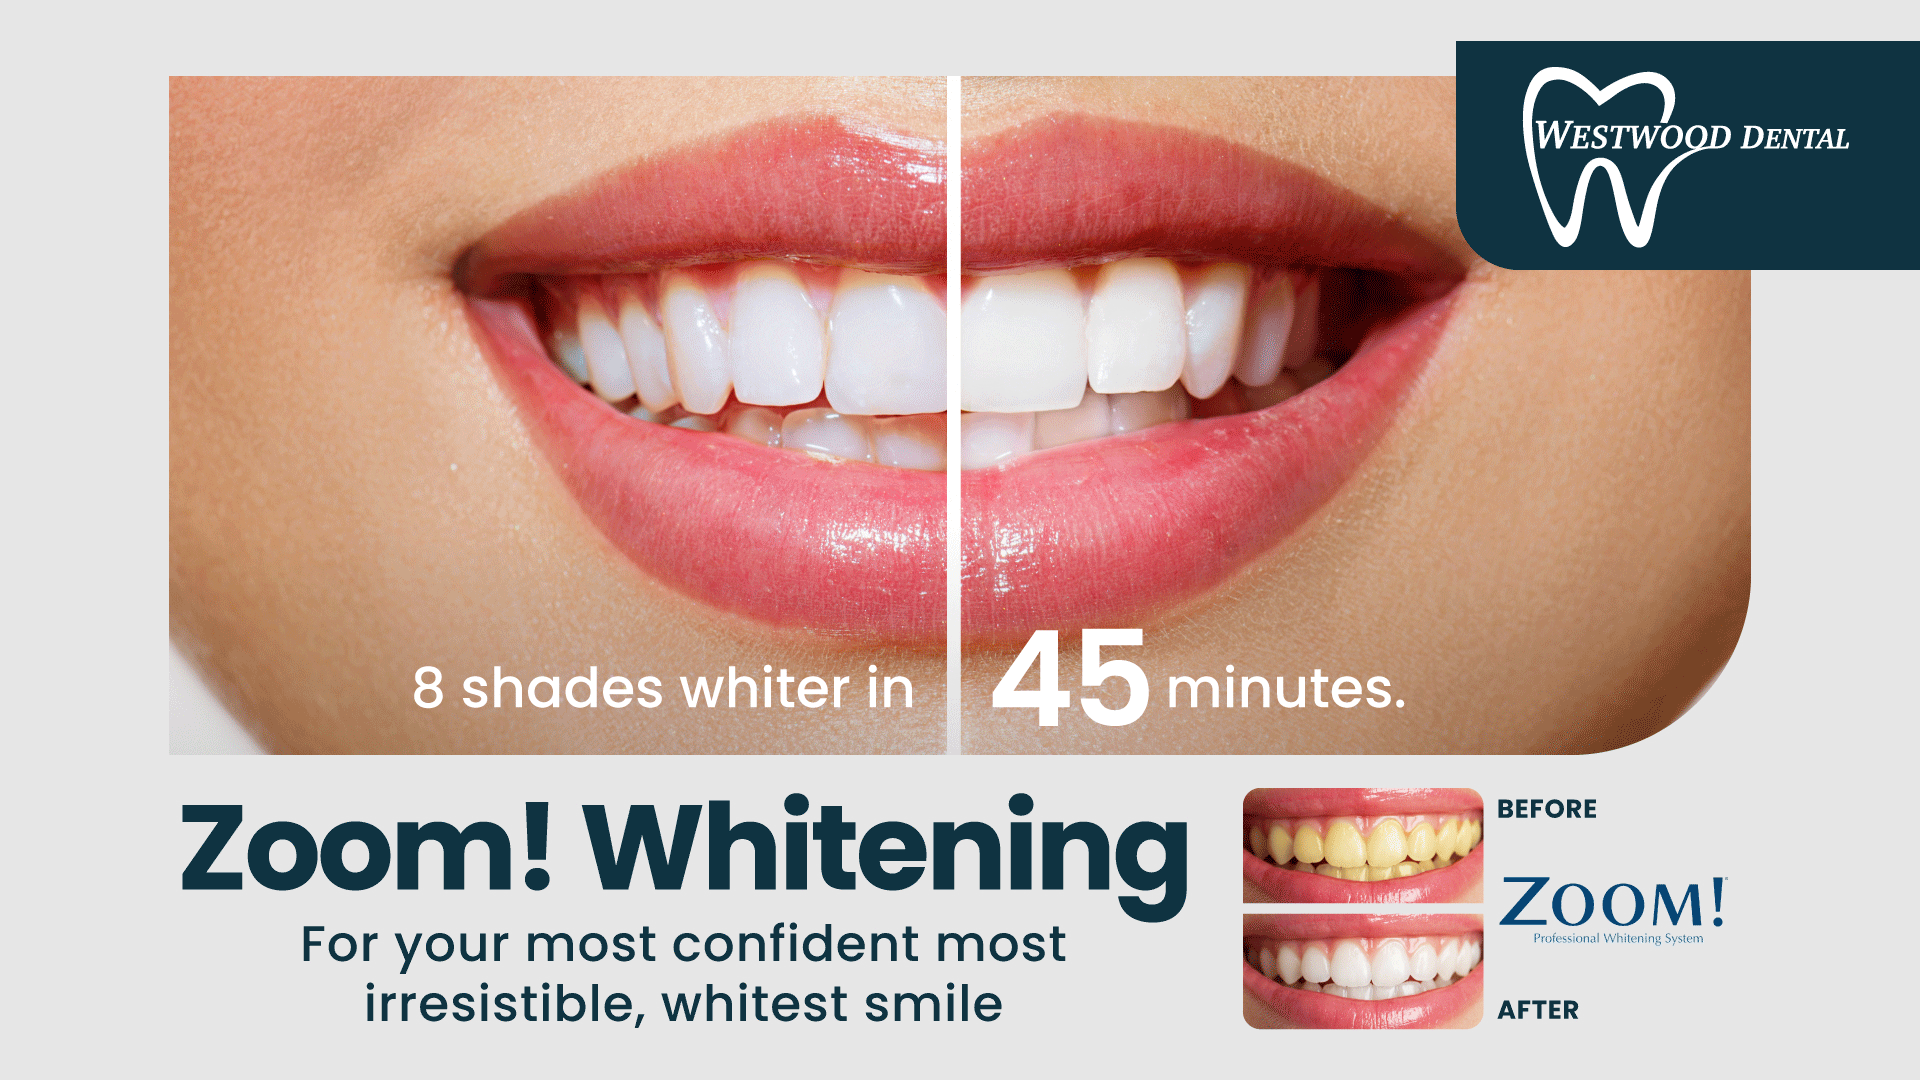 8 shades whiter in 45 minutes. 'Zoom!' Whitening. For your most confident most irresistible, whitest smile.